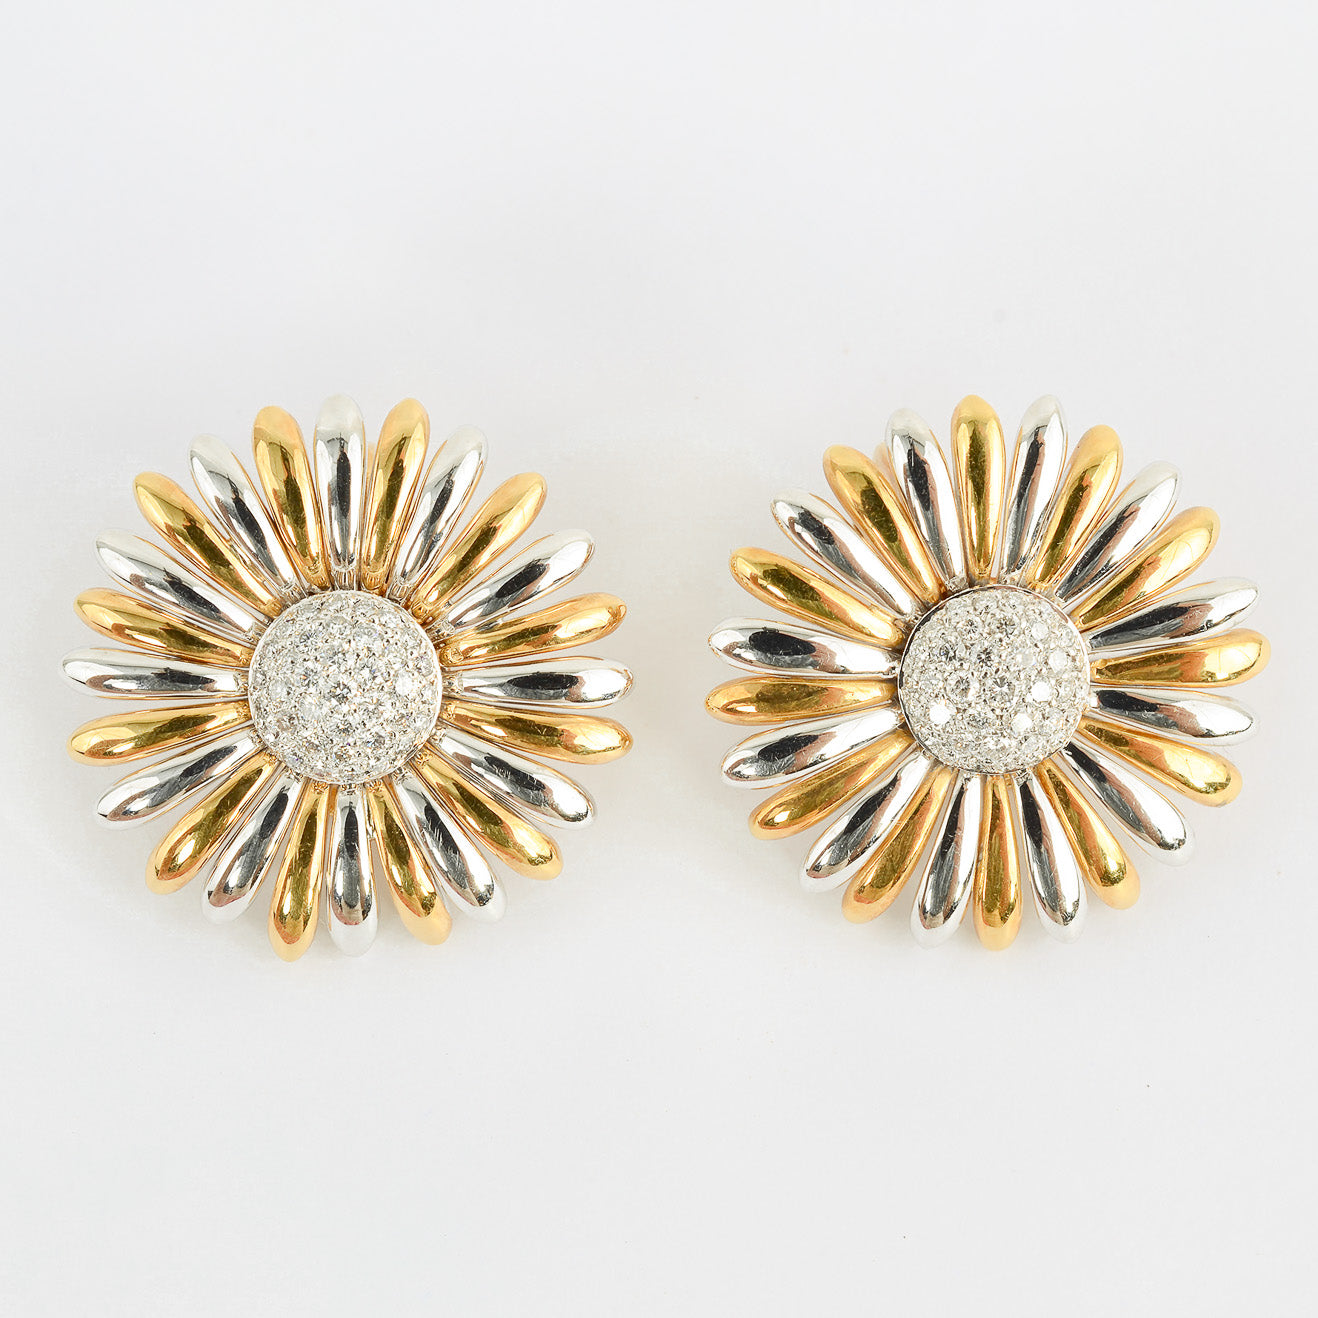 Antique Silver, Gold, and diamond Sunflower Earrings by Ashland & Co. 